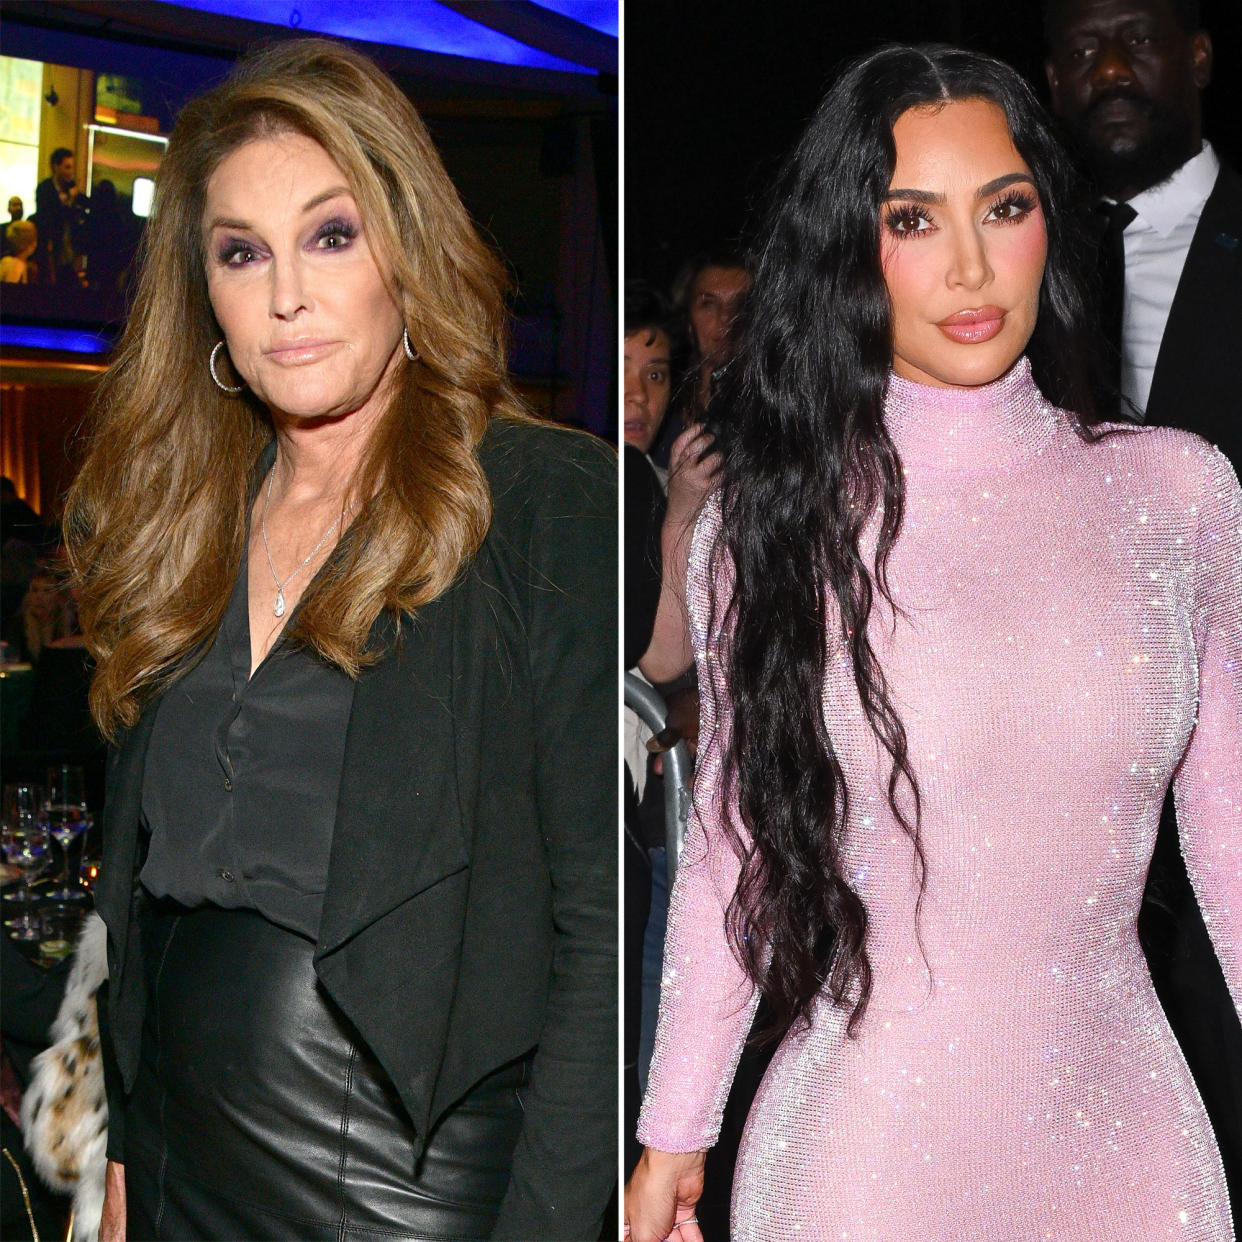 Caitlyn Jenner Reacts to Kim Kardashians Comment About Her in The Kardashians Episode